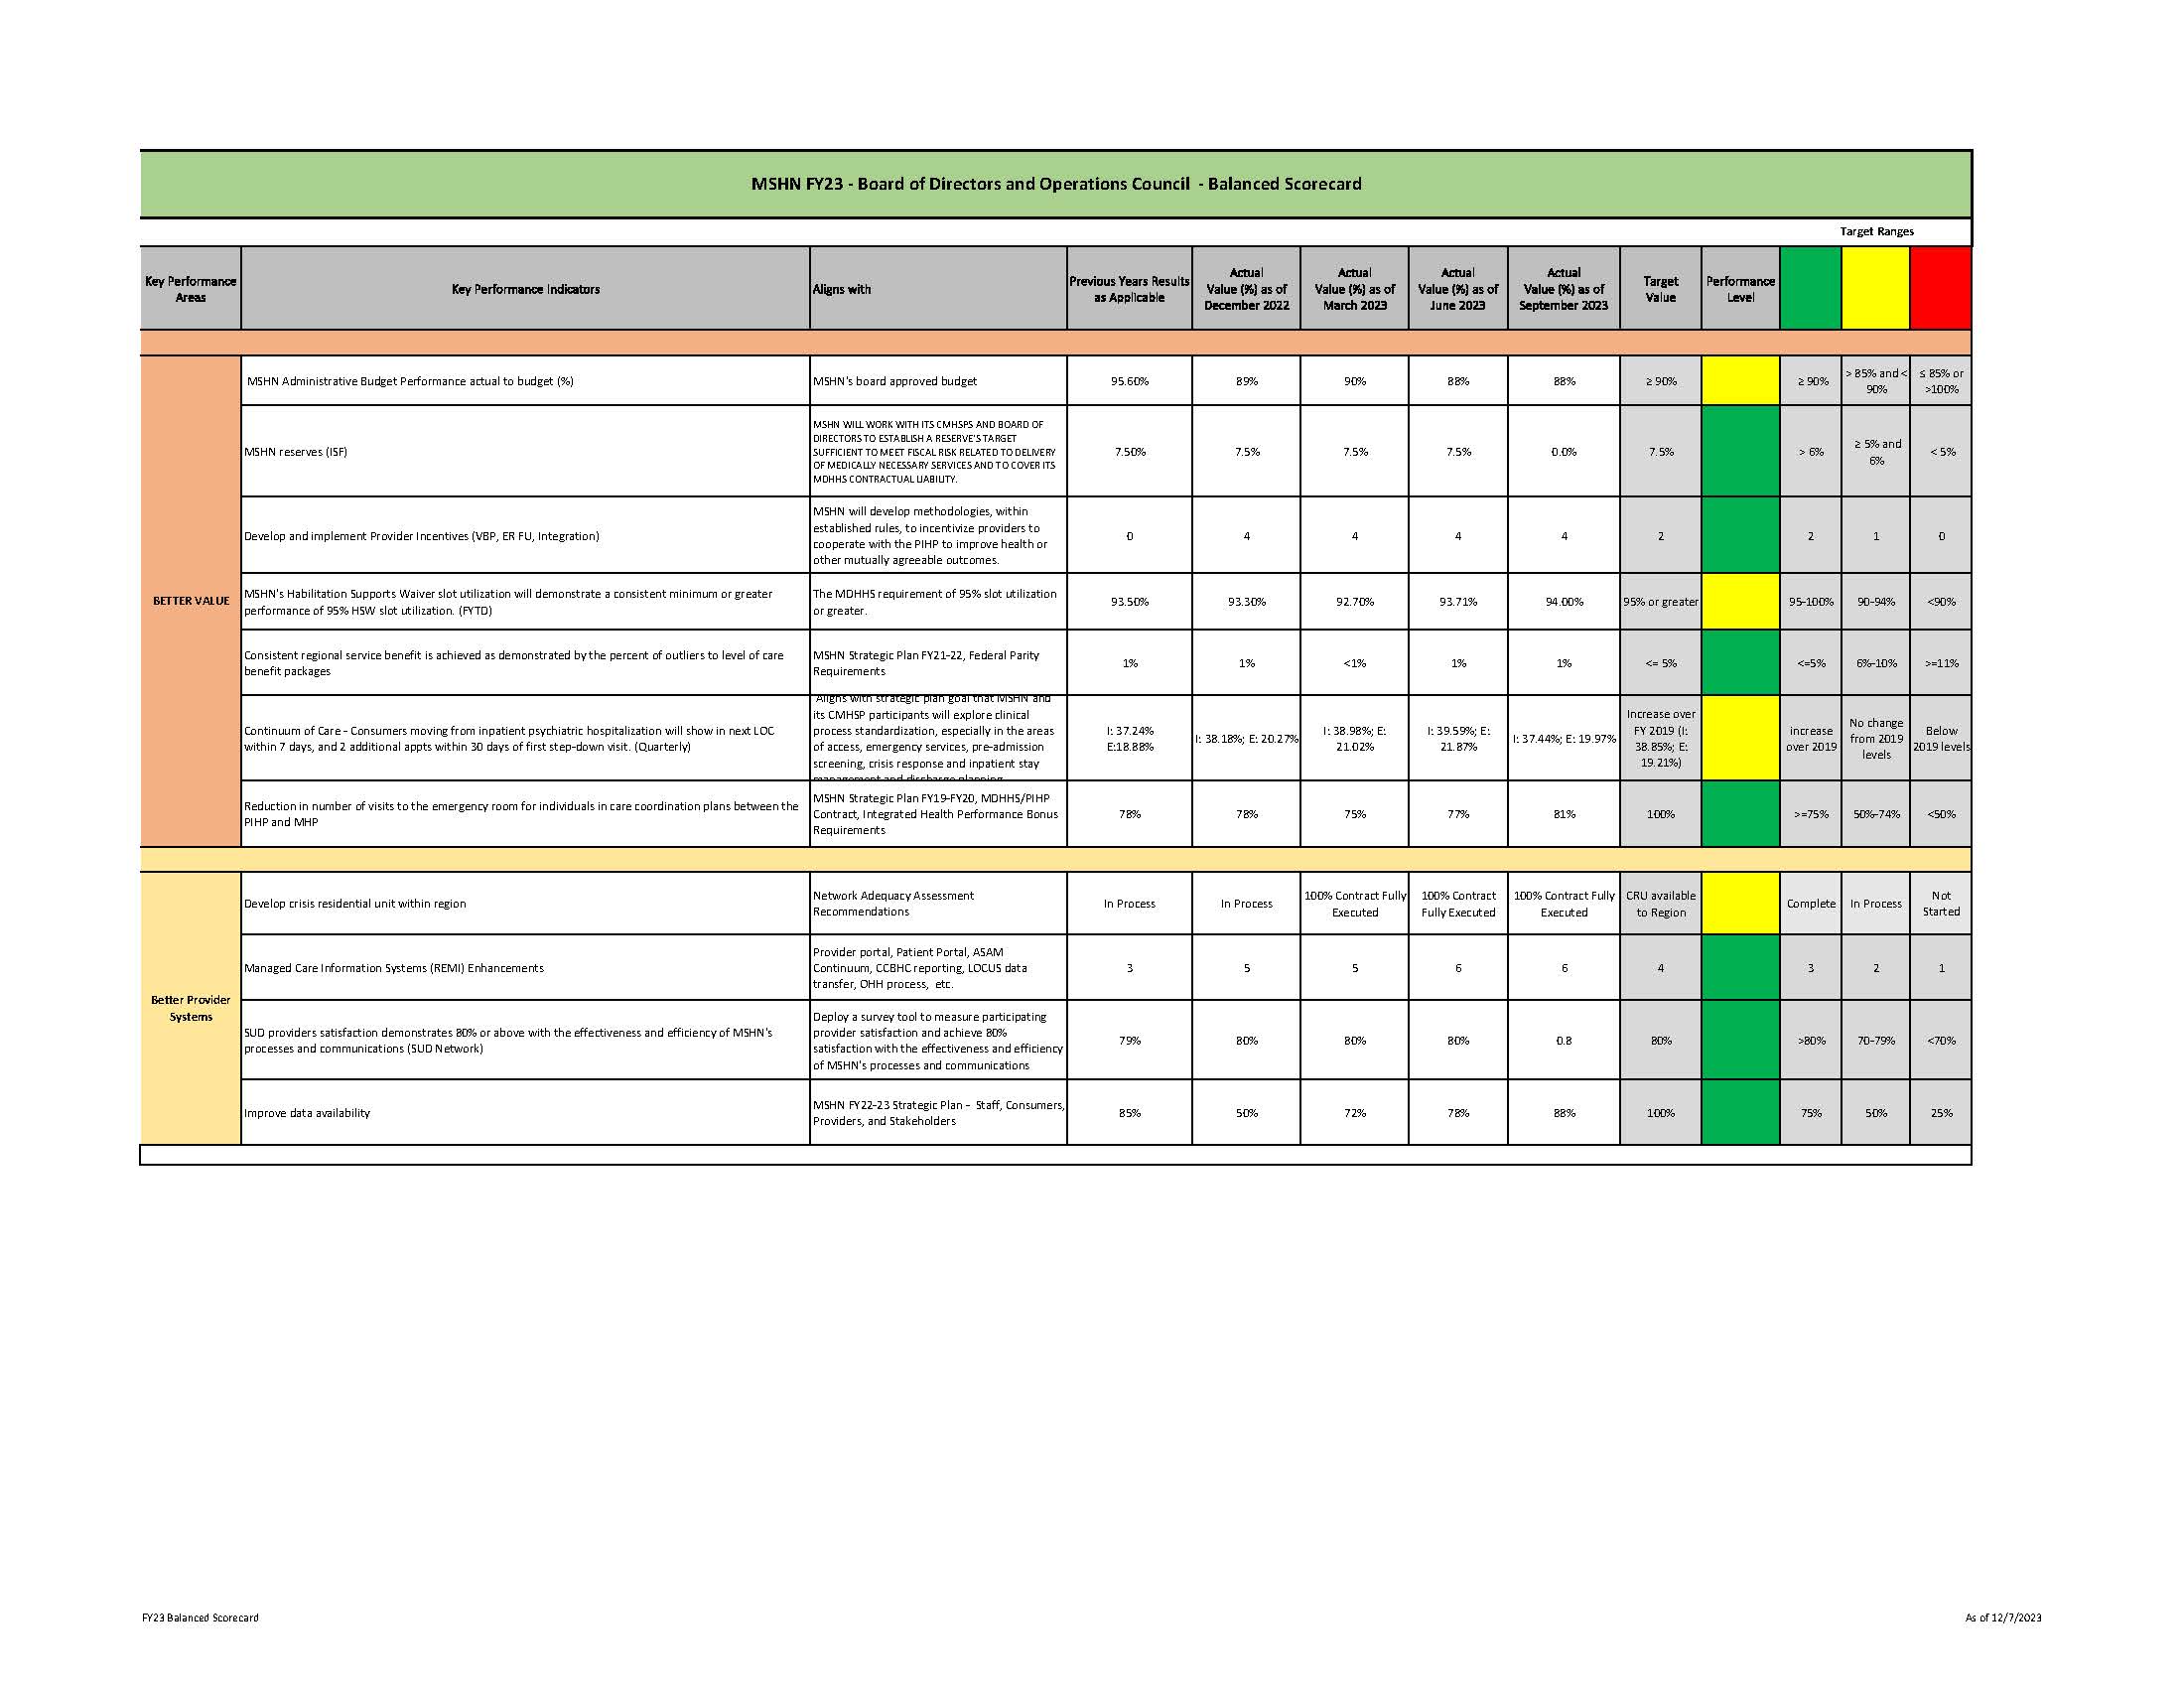 The Board of Directors Balanced Scorecard includes measures related to the Strategic Plan and overall agency performance.

Scores are reflective of the providers that received full reviews in the year identified.  MSHN conducts full reviews for SUD providers over a two-year period due to the size of the network. 